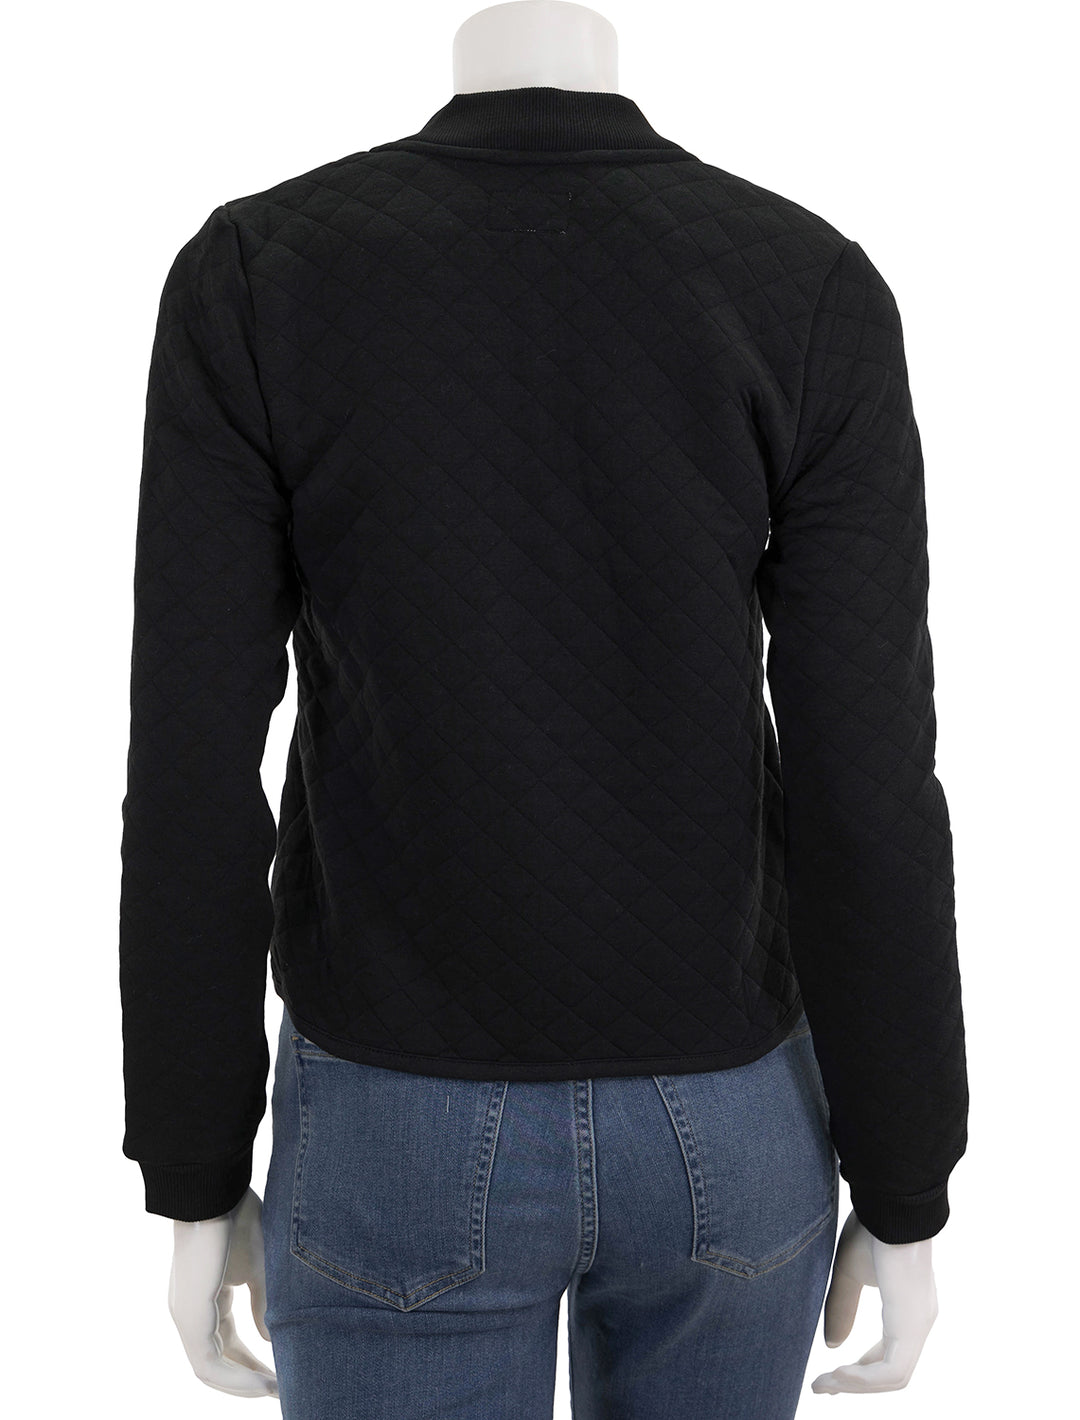 Back view of Marine Layer's corbet quilted bomber in black.